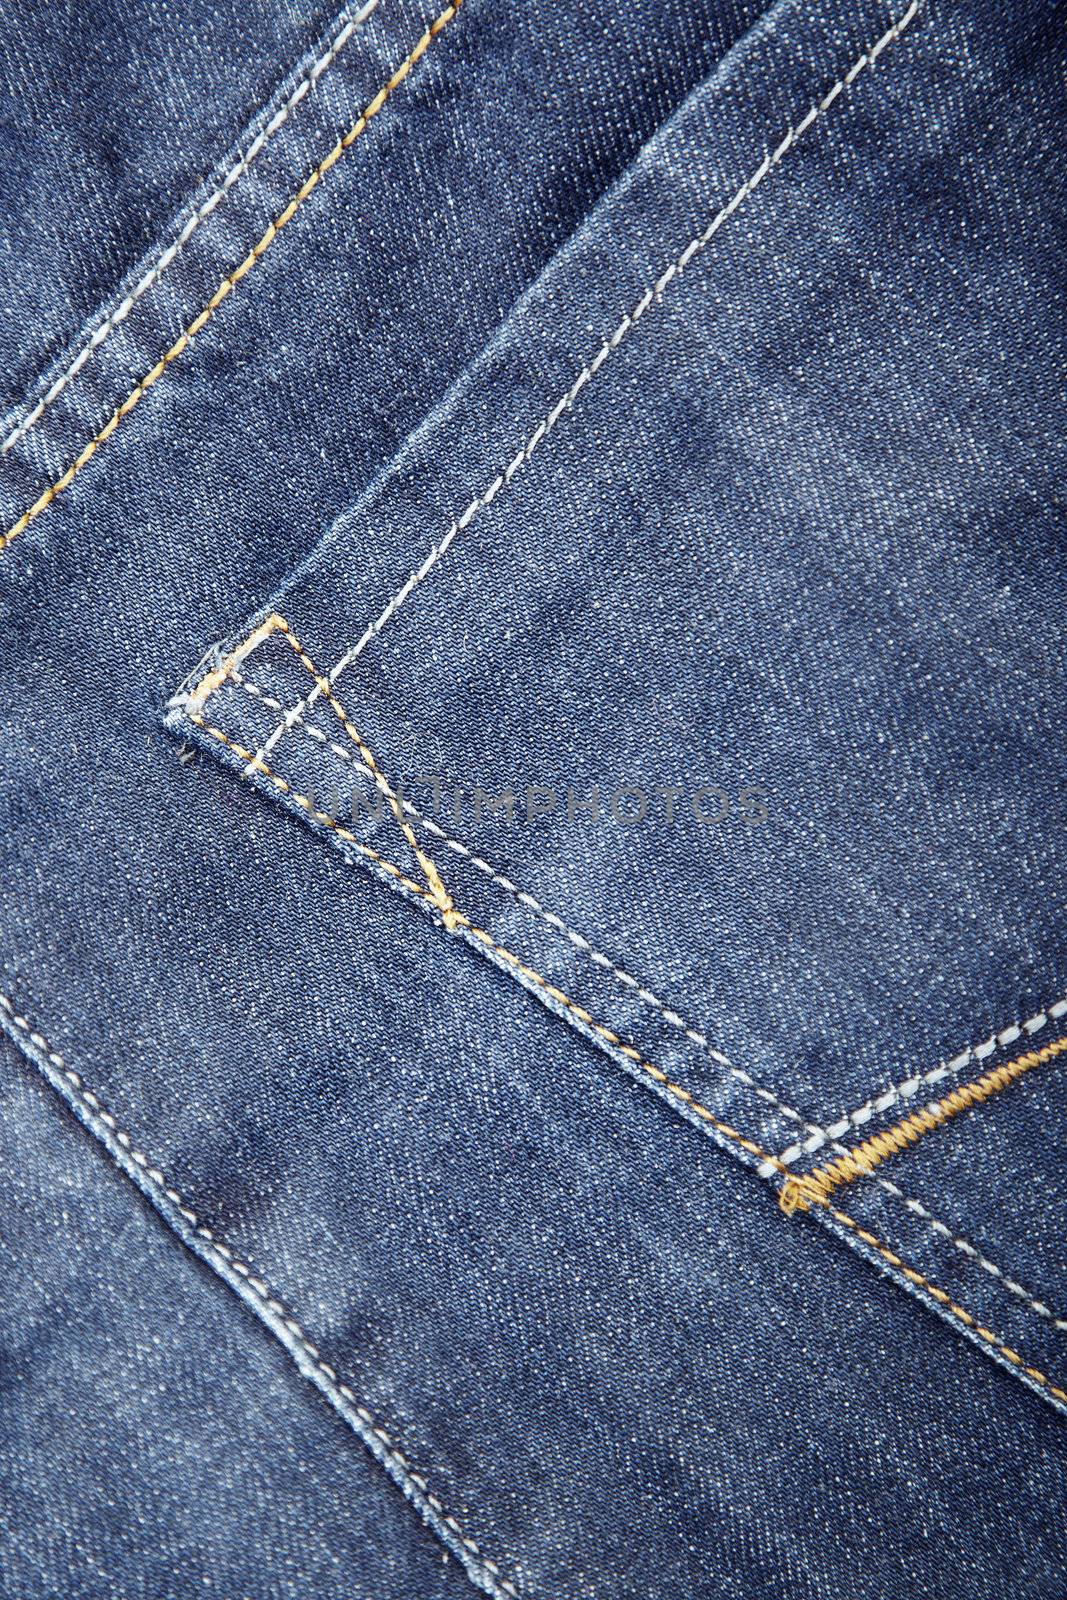 Blue jeans with pocket. Close-up photo